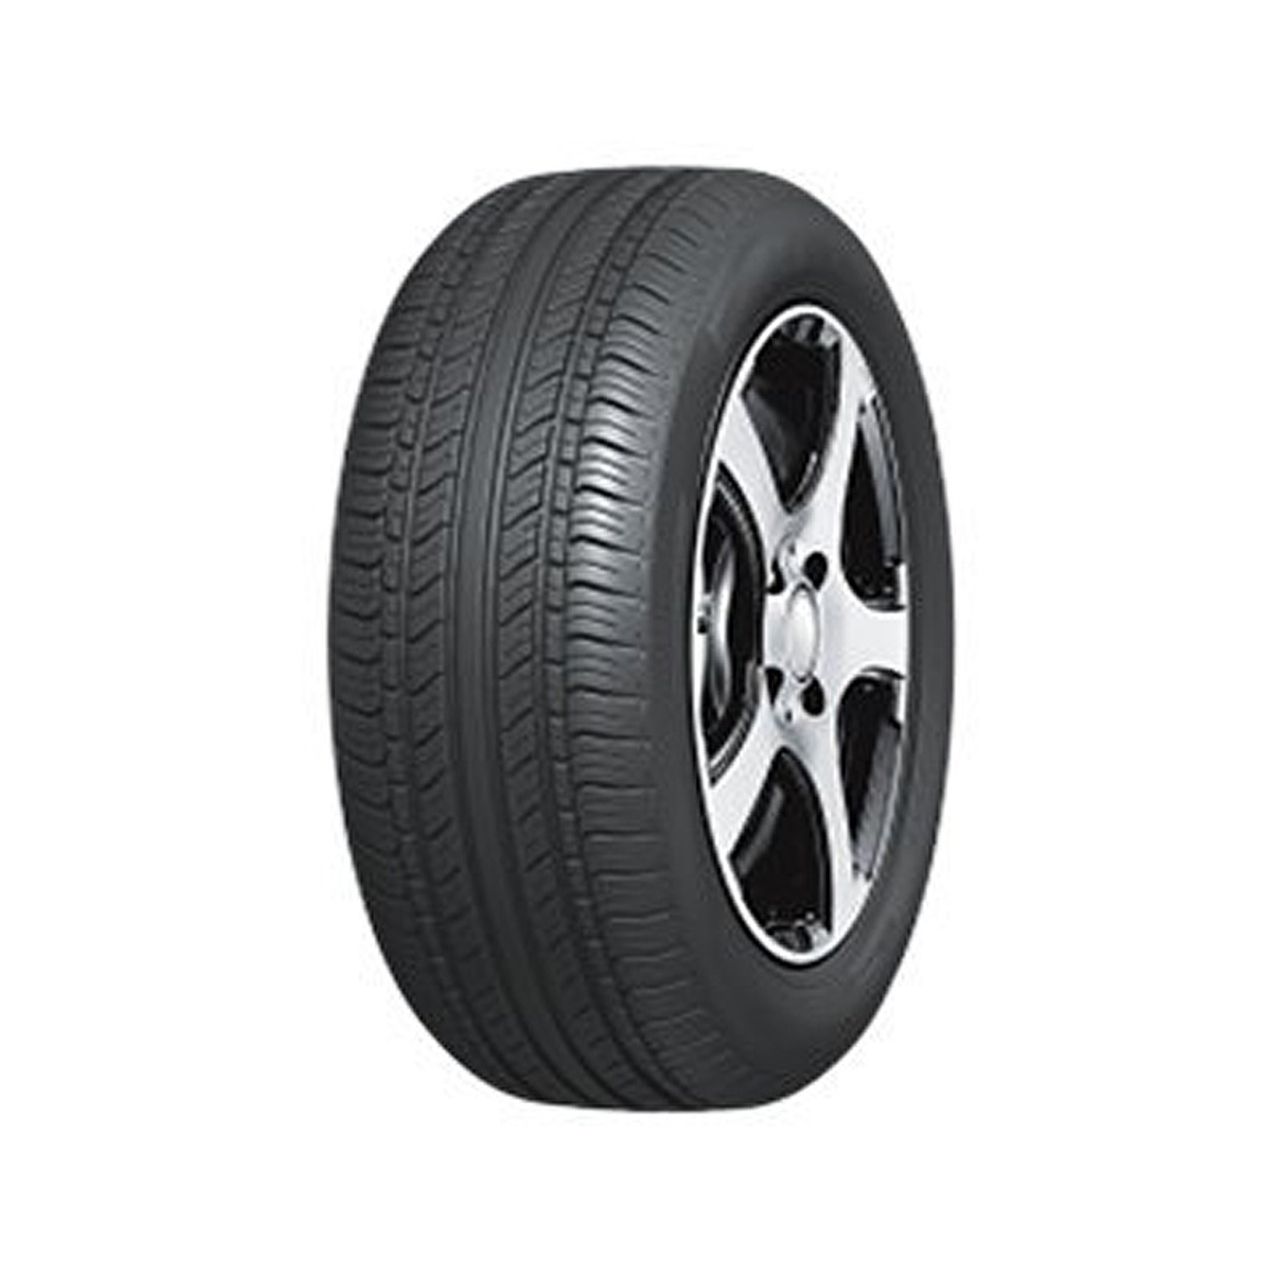 ROVELO RHP-780P 195/65R15 91V BSW